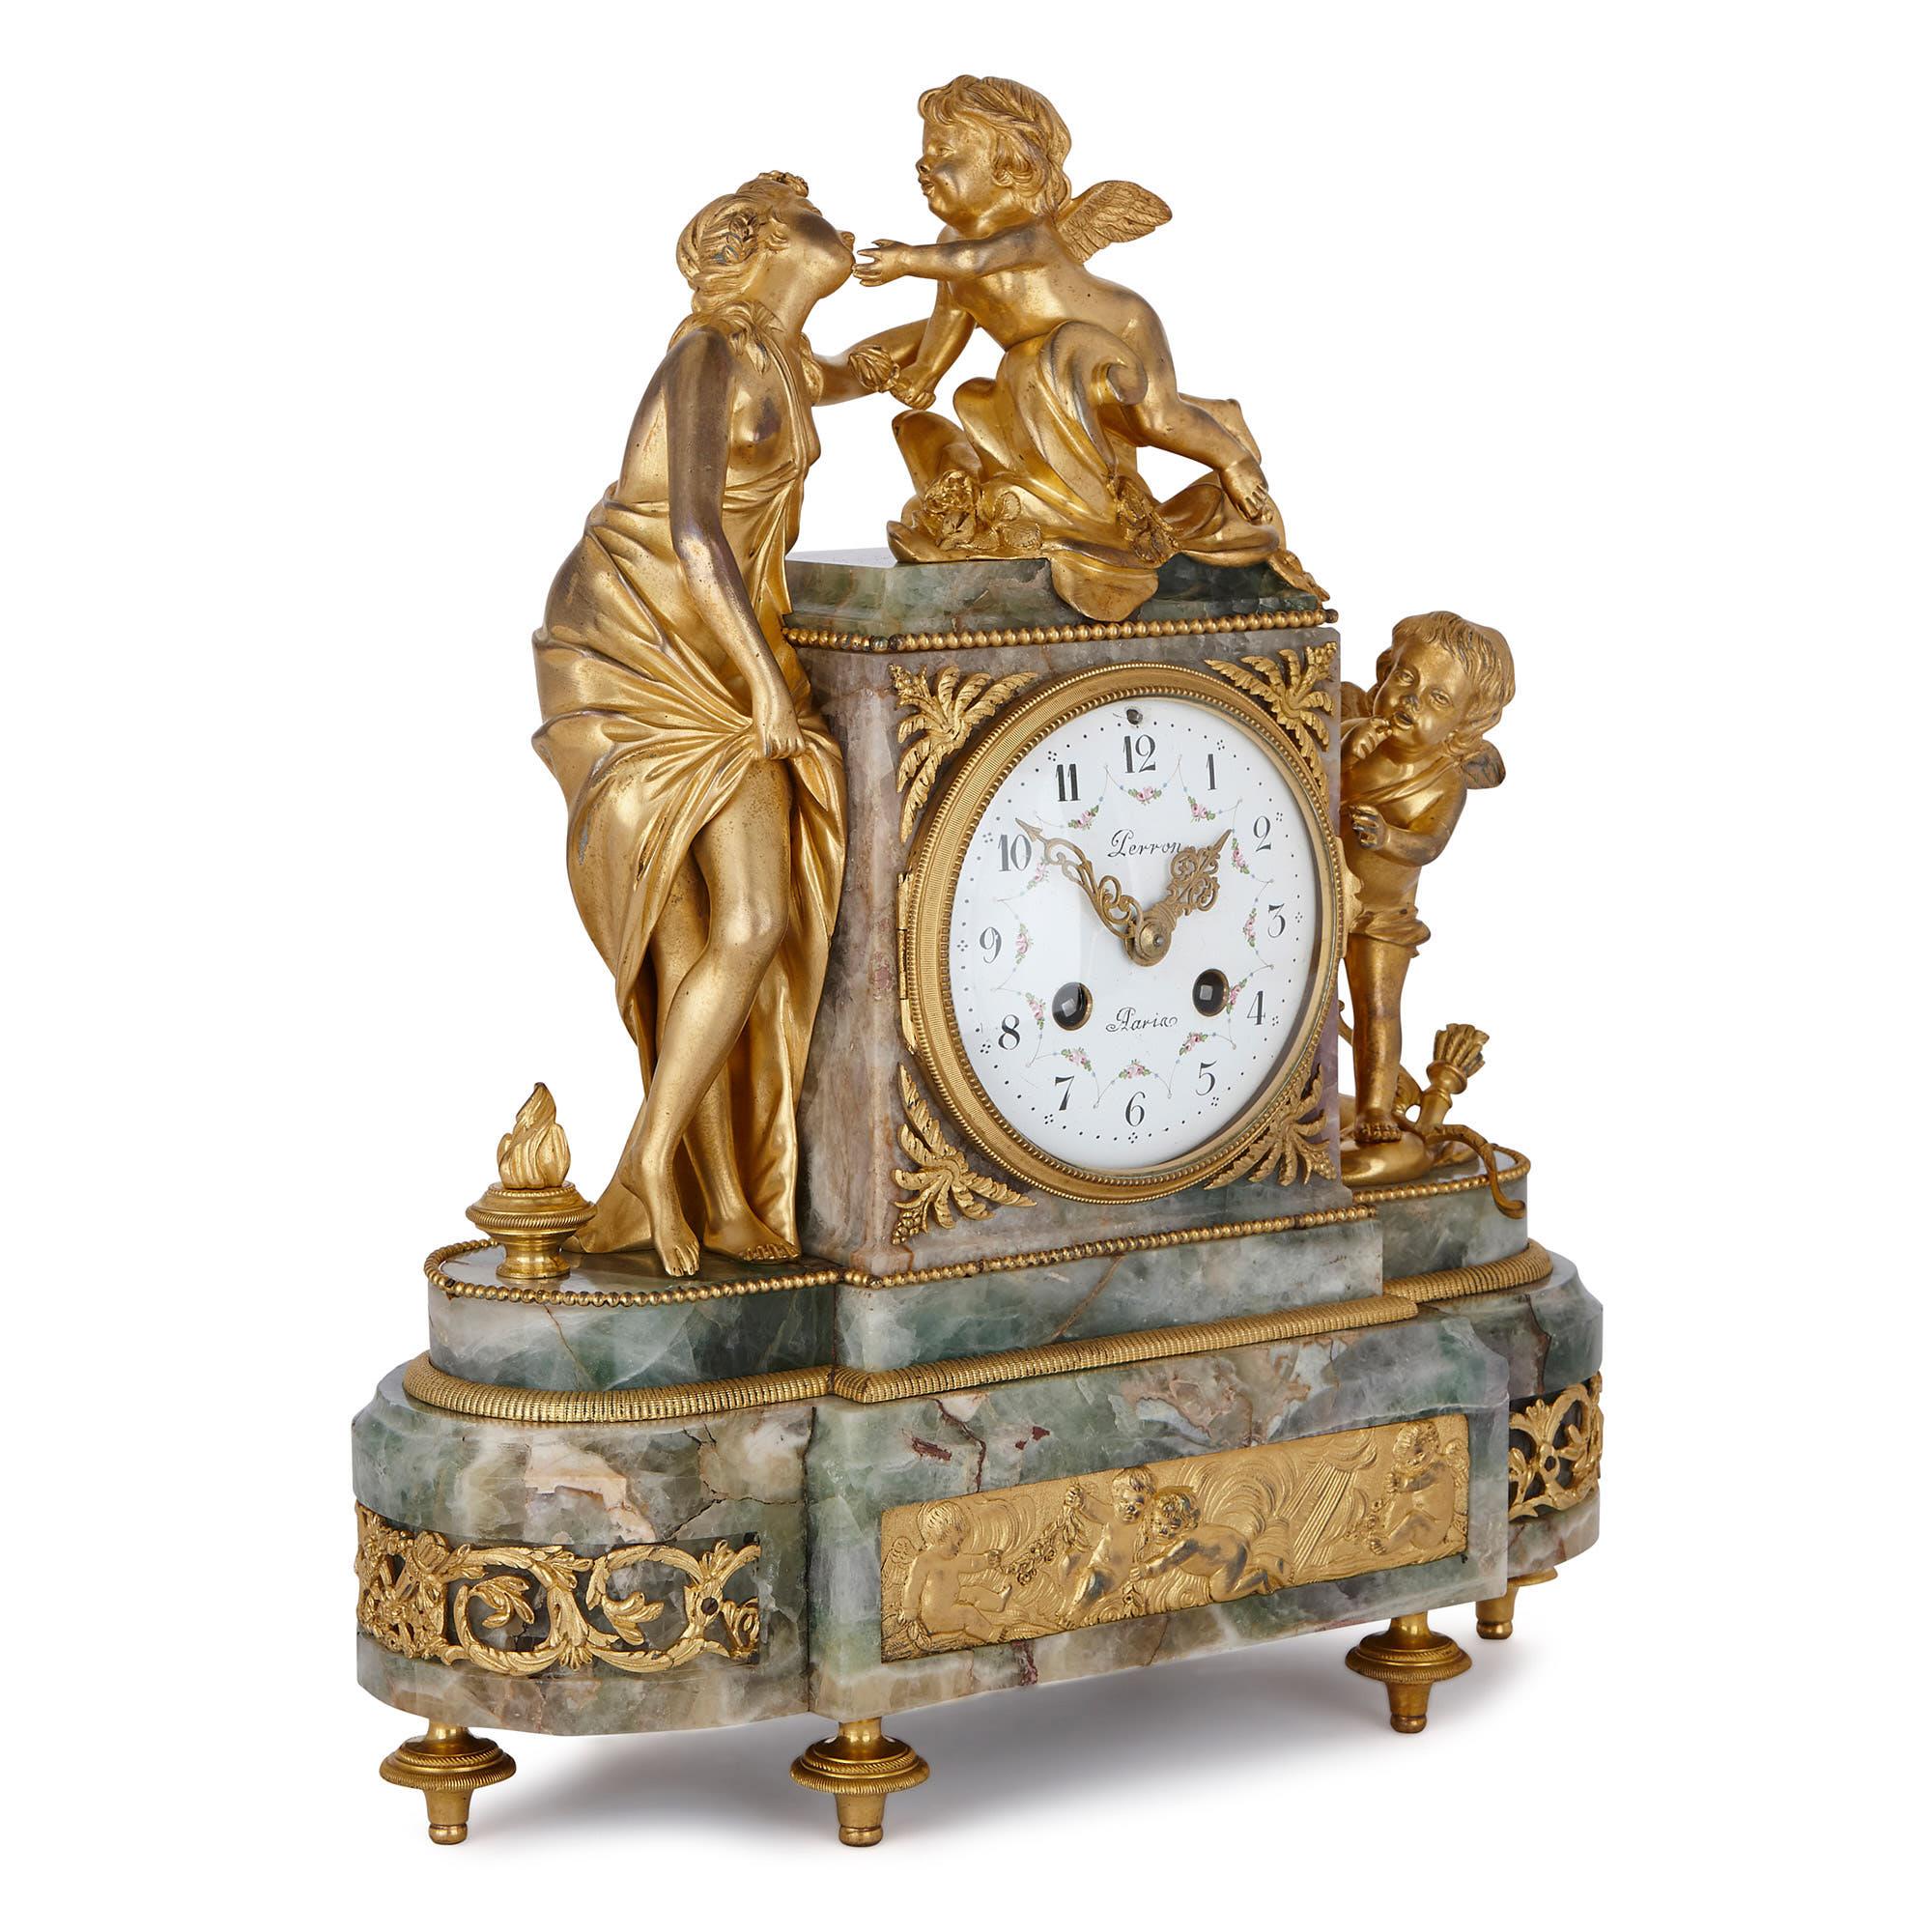 Created France at the turn of the century, this mantel clock has been crafted from the rare green / purple gemstone, fluorite, and is mounted with gilt bronze sculptures of Venus, the Goddess of Love, and two winged cherubim. 

The fluorite clock